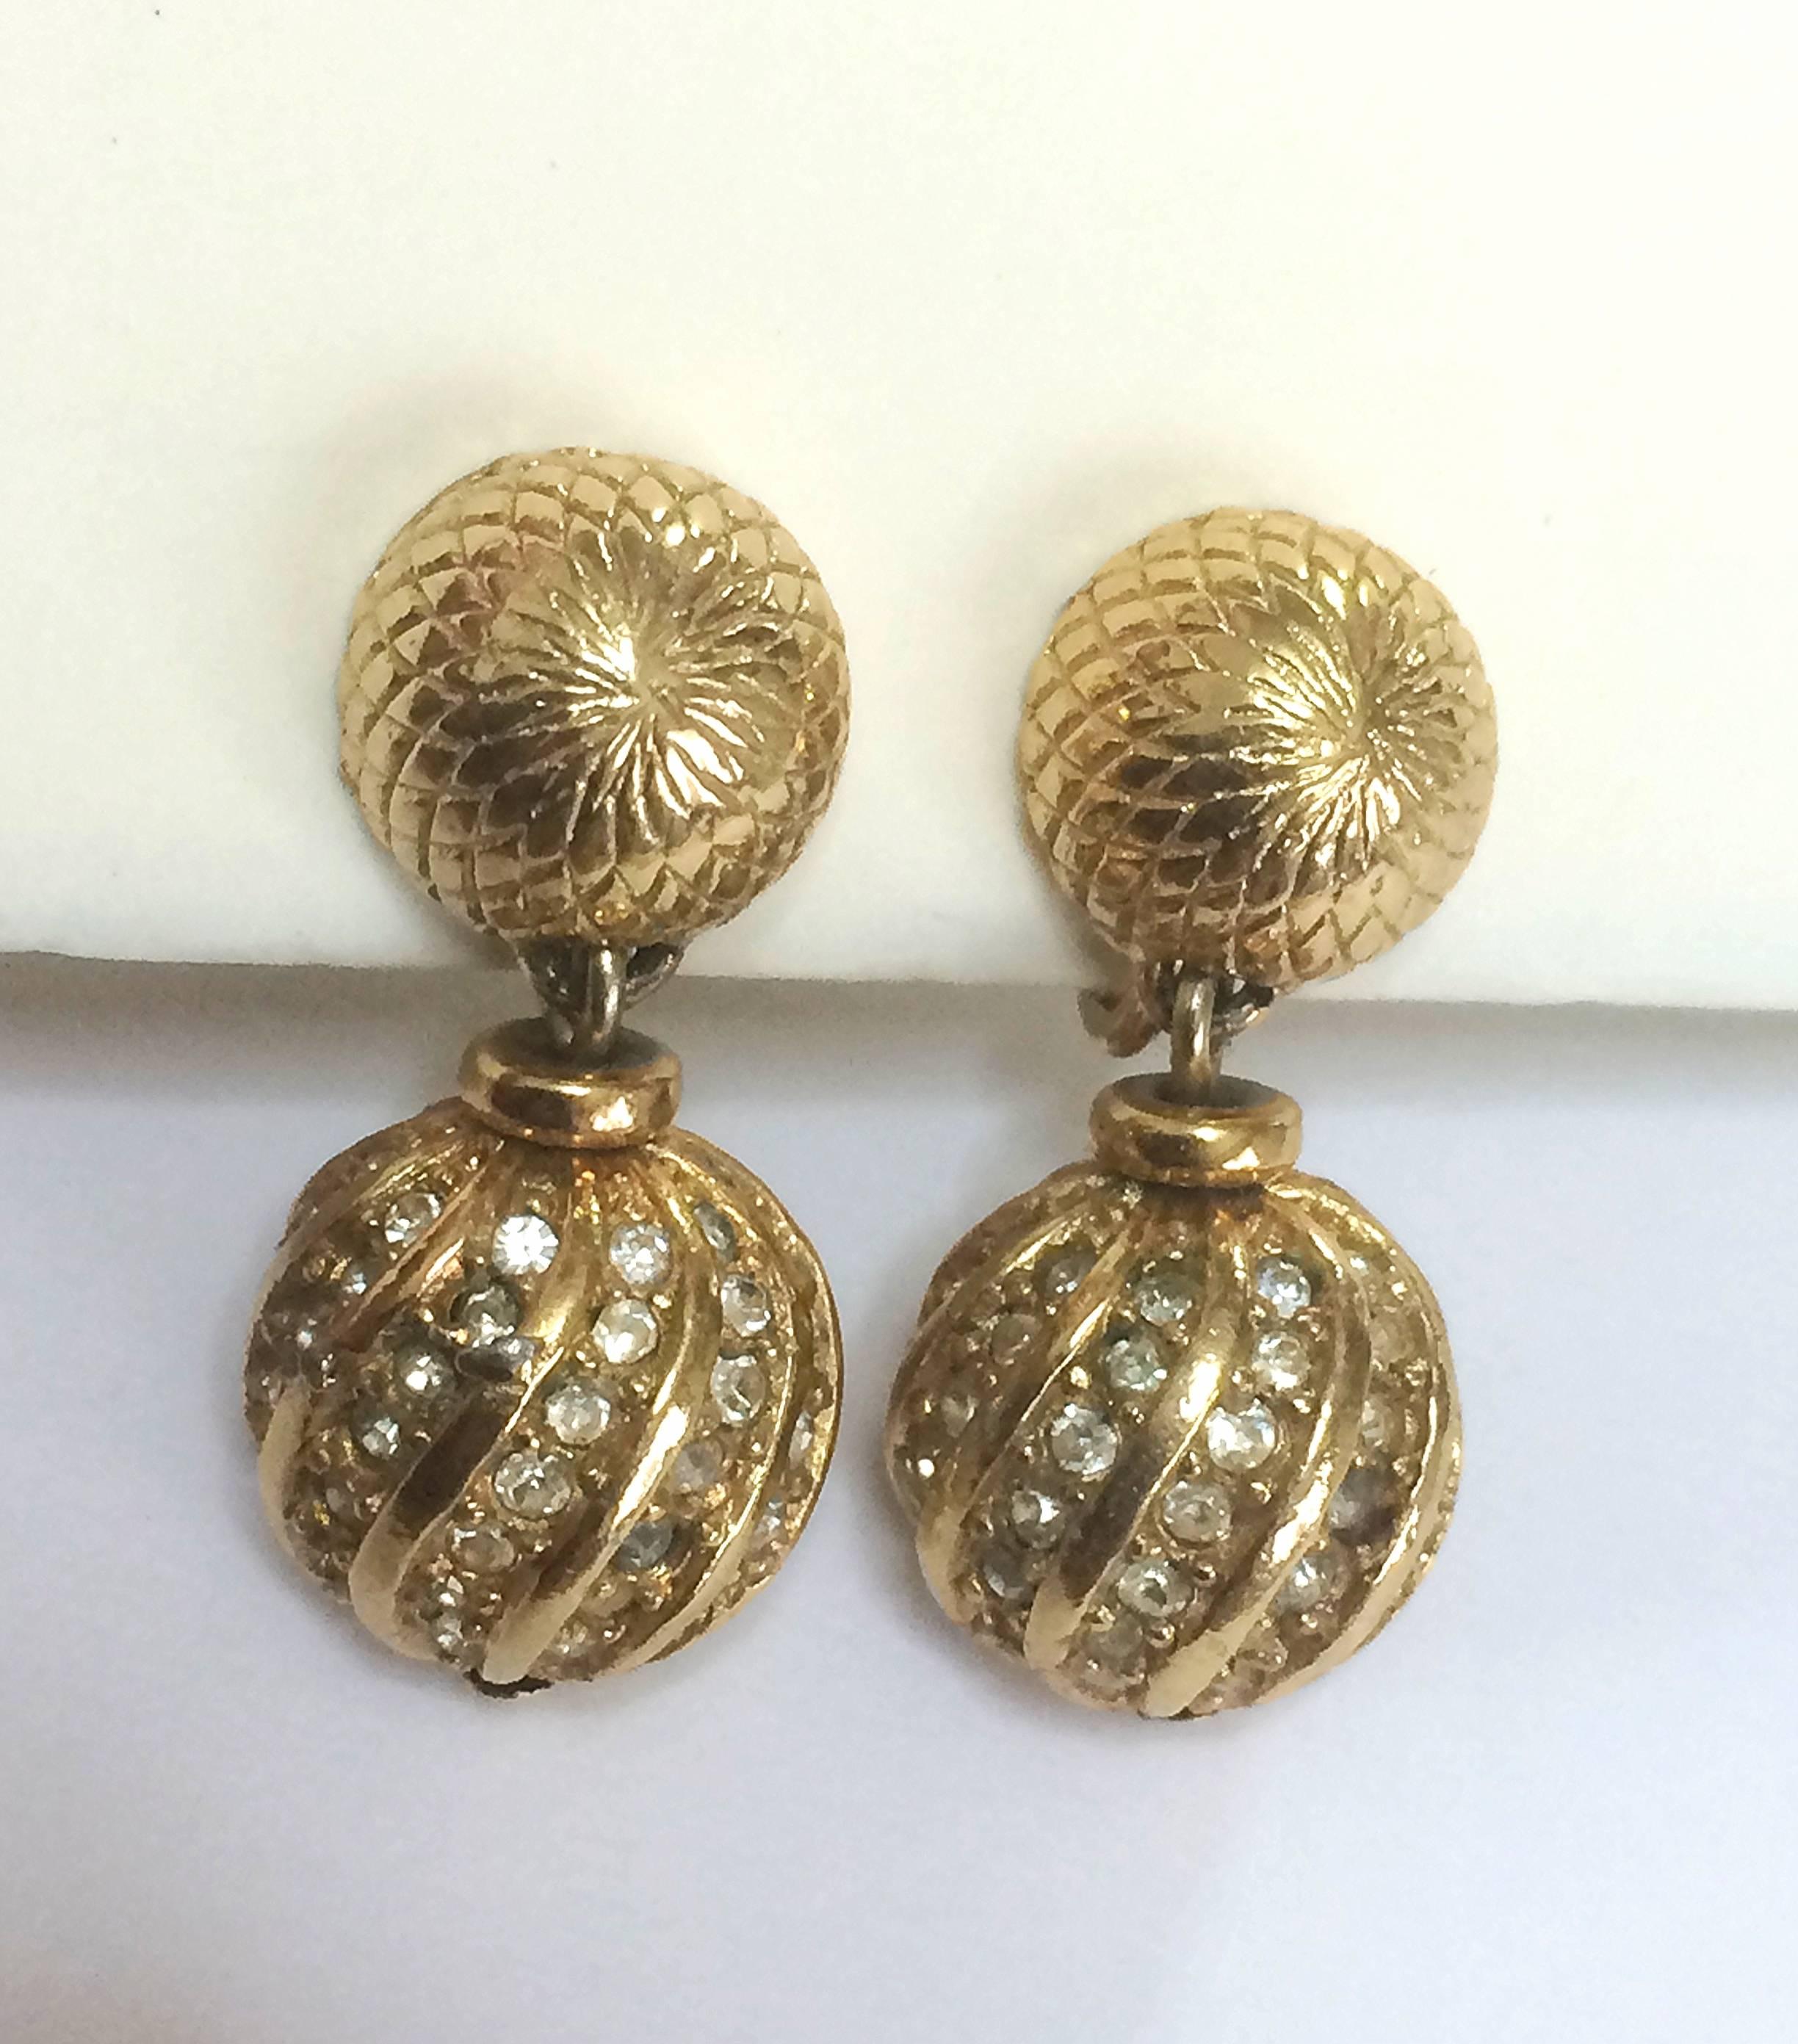 Vintage Christian Dior golden ball charm dangling earrings, rhinestone crystals In Good Condition For Sale In Kashiwa, Chiba